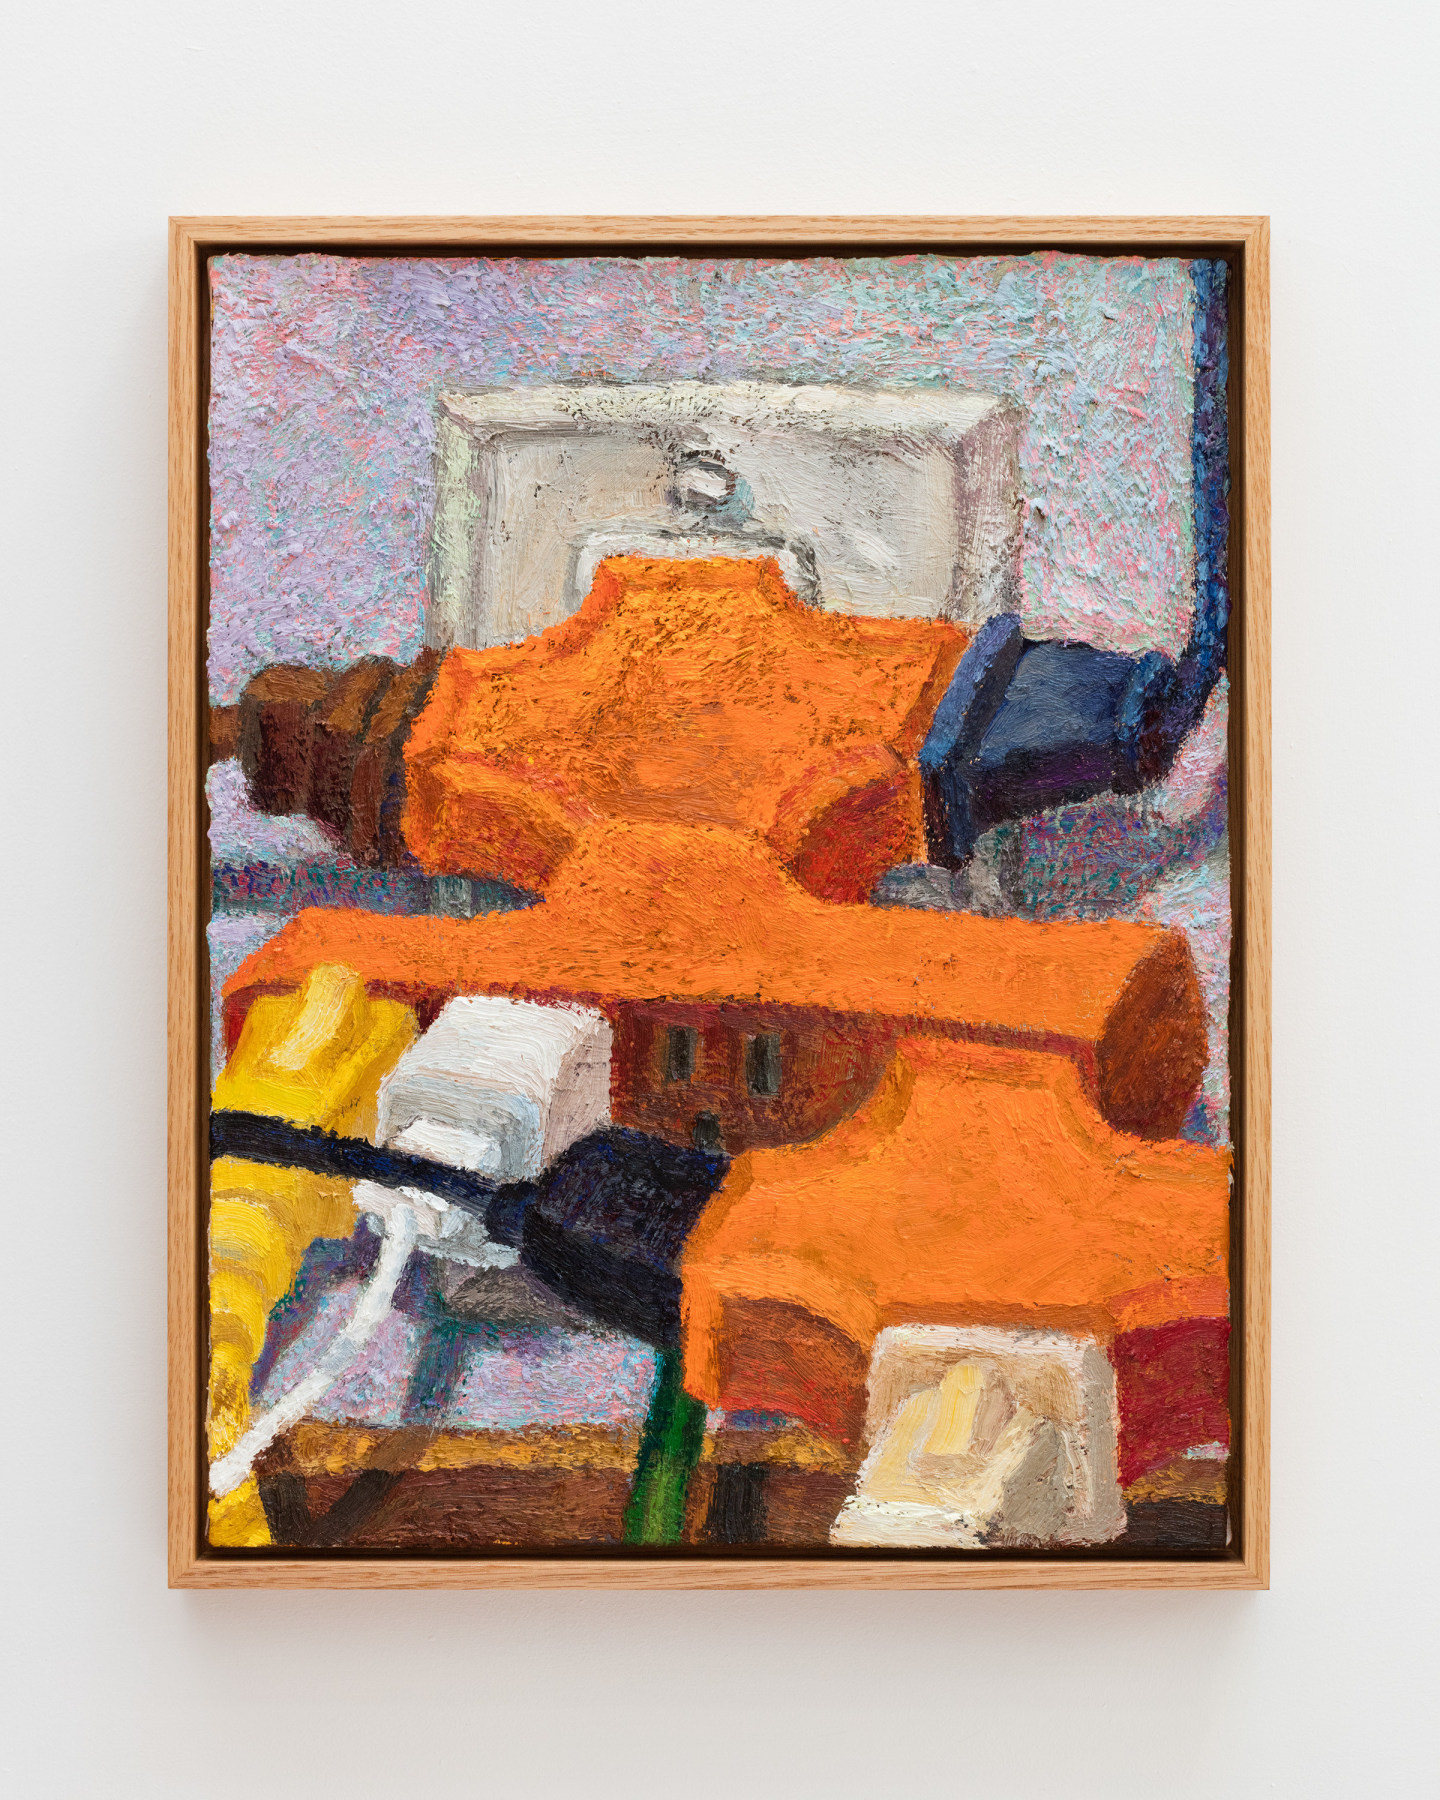 Keegan Monaghan, Outlet, 2020. Oil on canvas in oak frame, 18 7/8 x 15 inches (47.9 x 38.1 cm.) Courtesy of the artist and Parker Gallery, Los Angeles